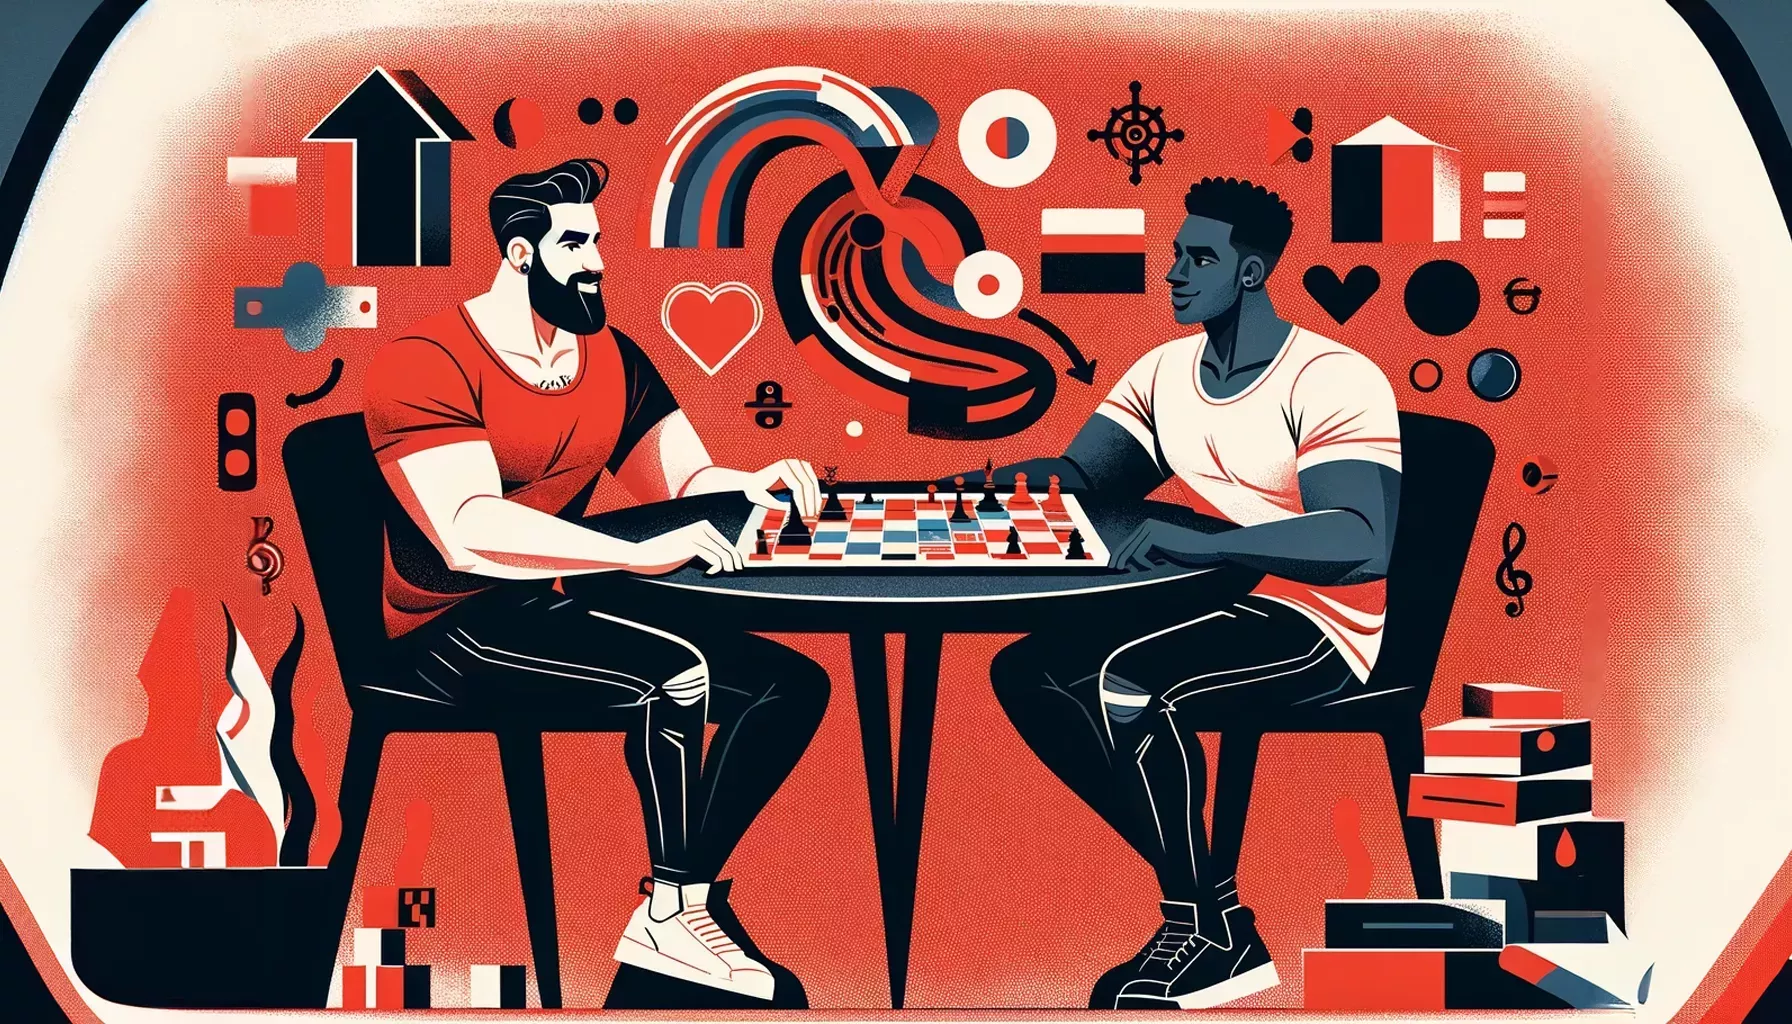 An illustration of two gay men enjoying a board game night together, sitting across from each other at a table. They are engaged in playing a board game, with expressions of focus and enjoyment.